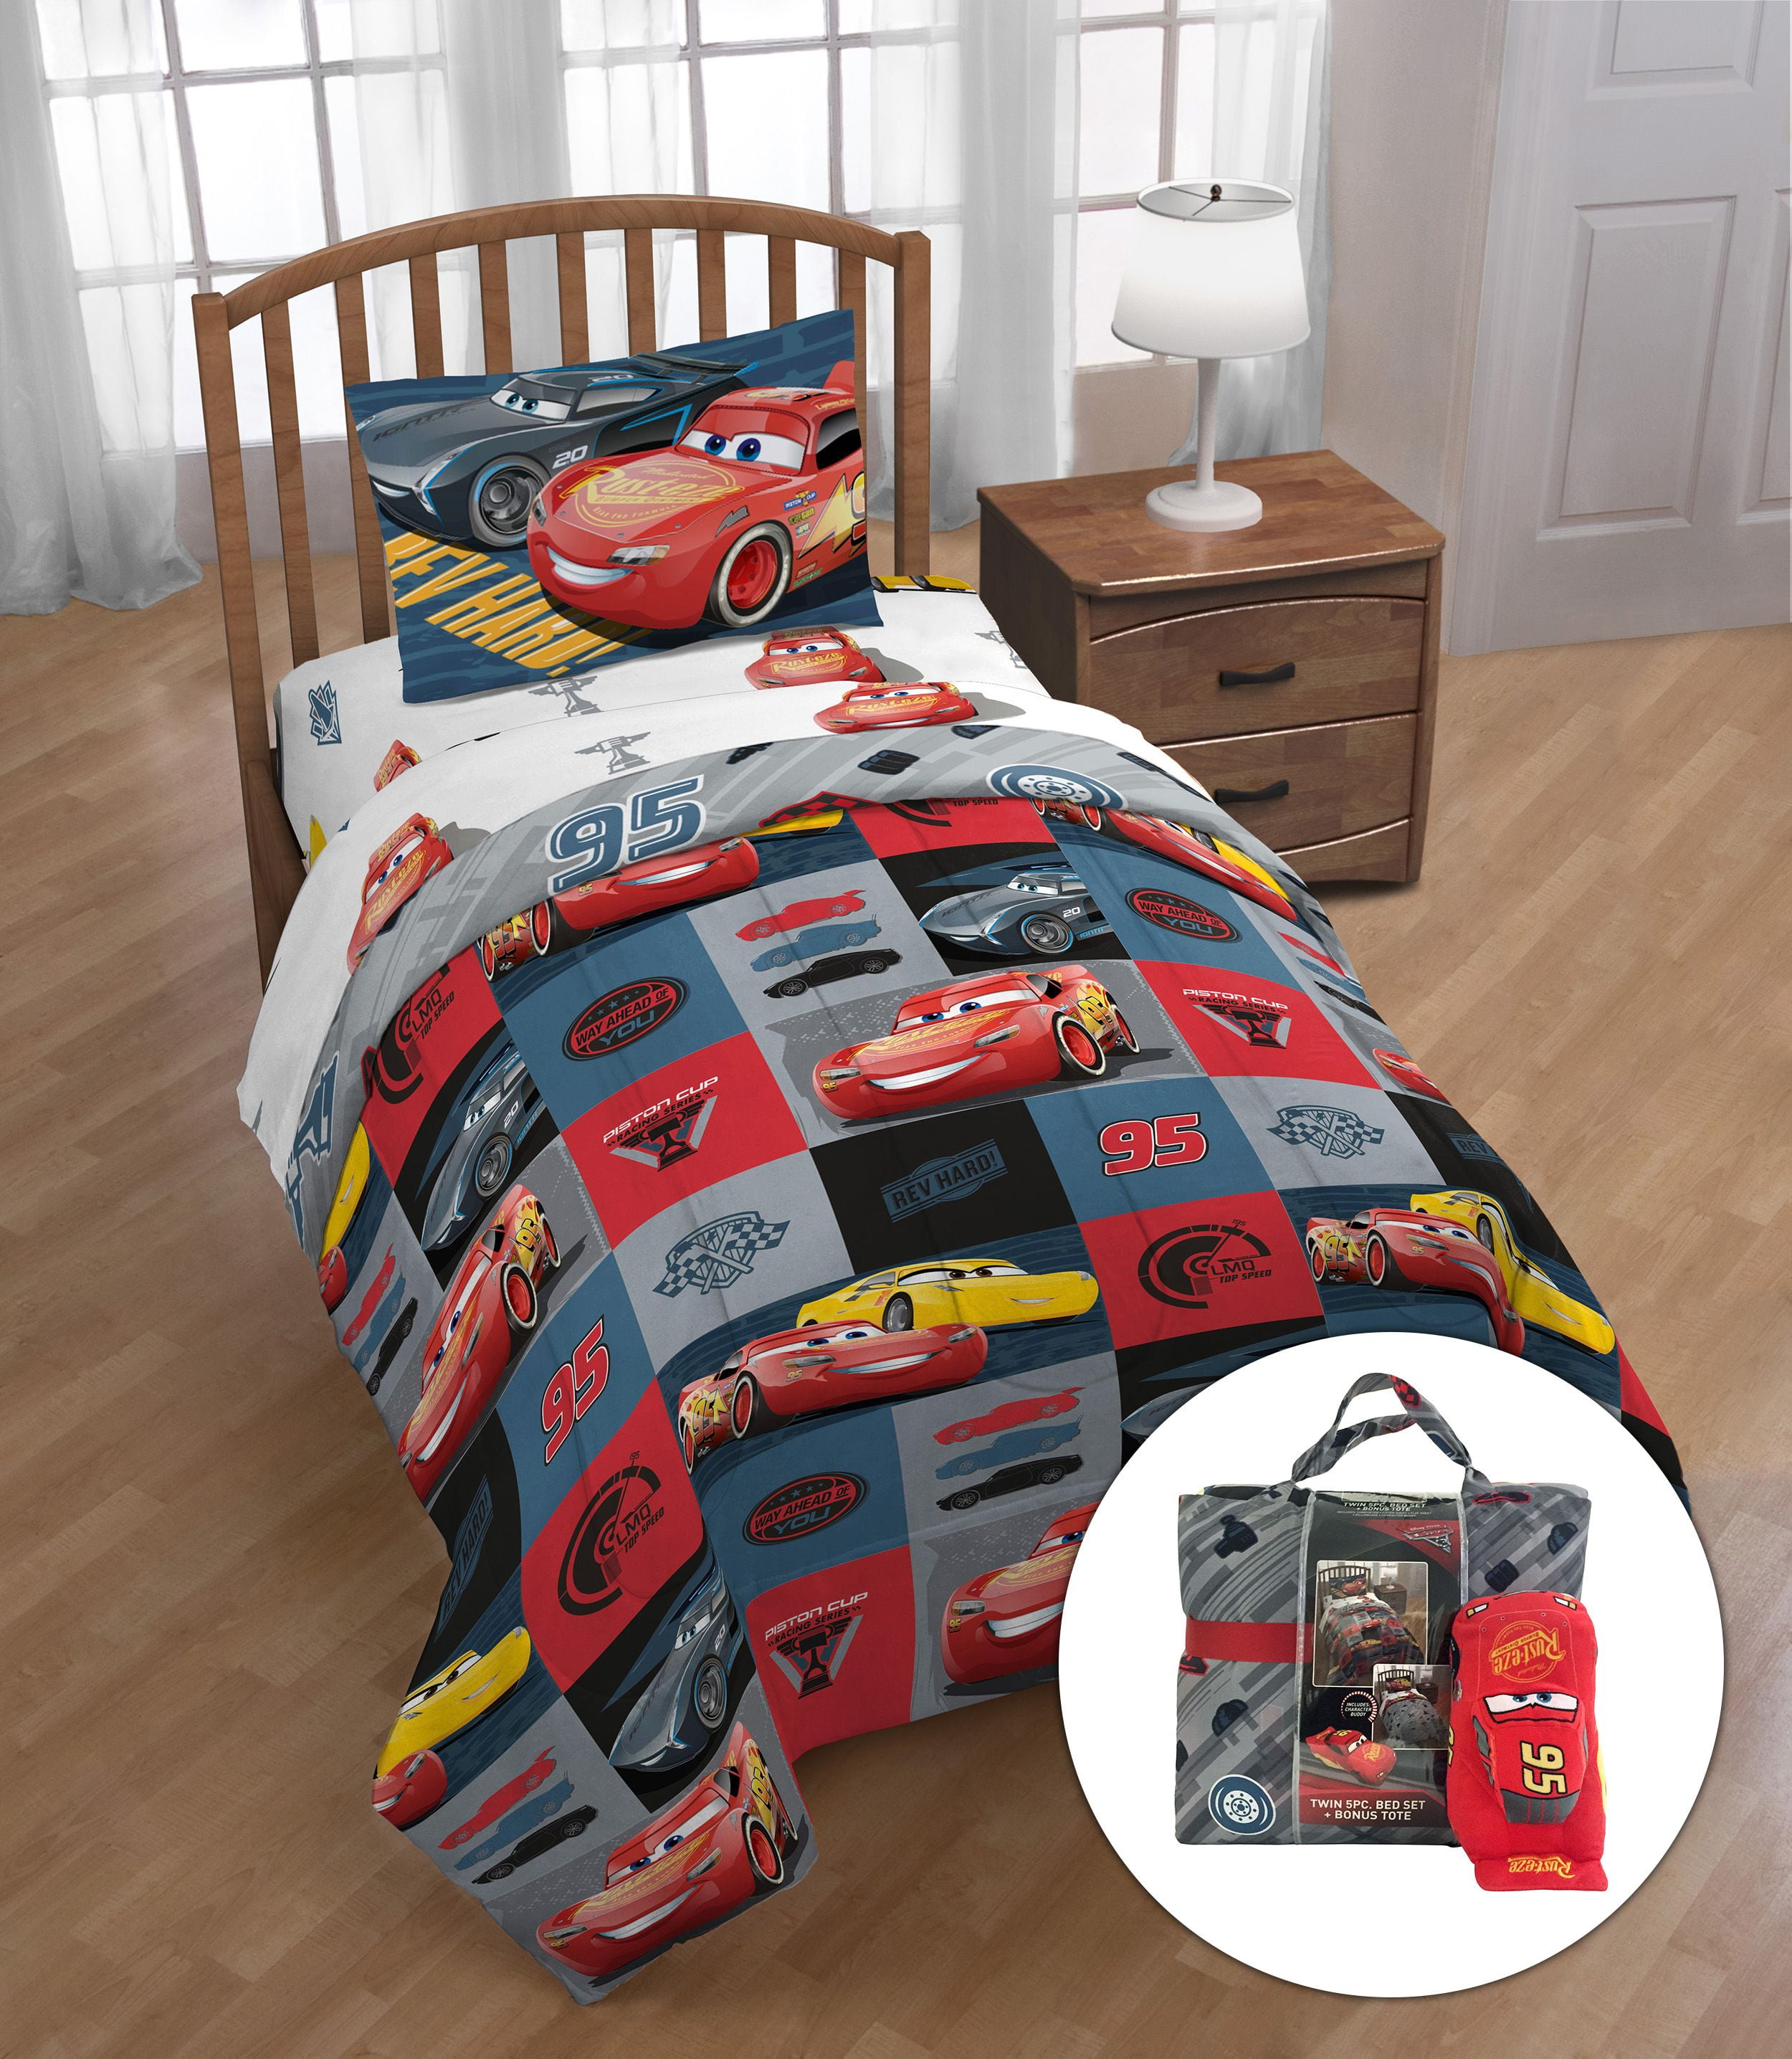 Disney Cars Rev Hard Twin Bed Set With, Disney Cars Twin Size 4 Piece Bed In A Bag